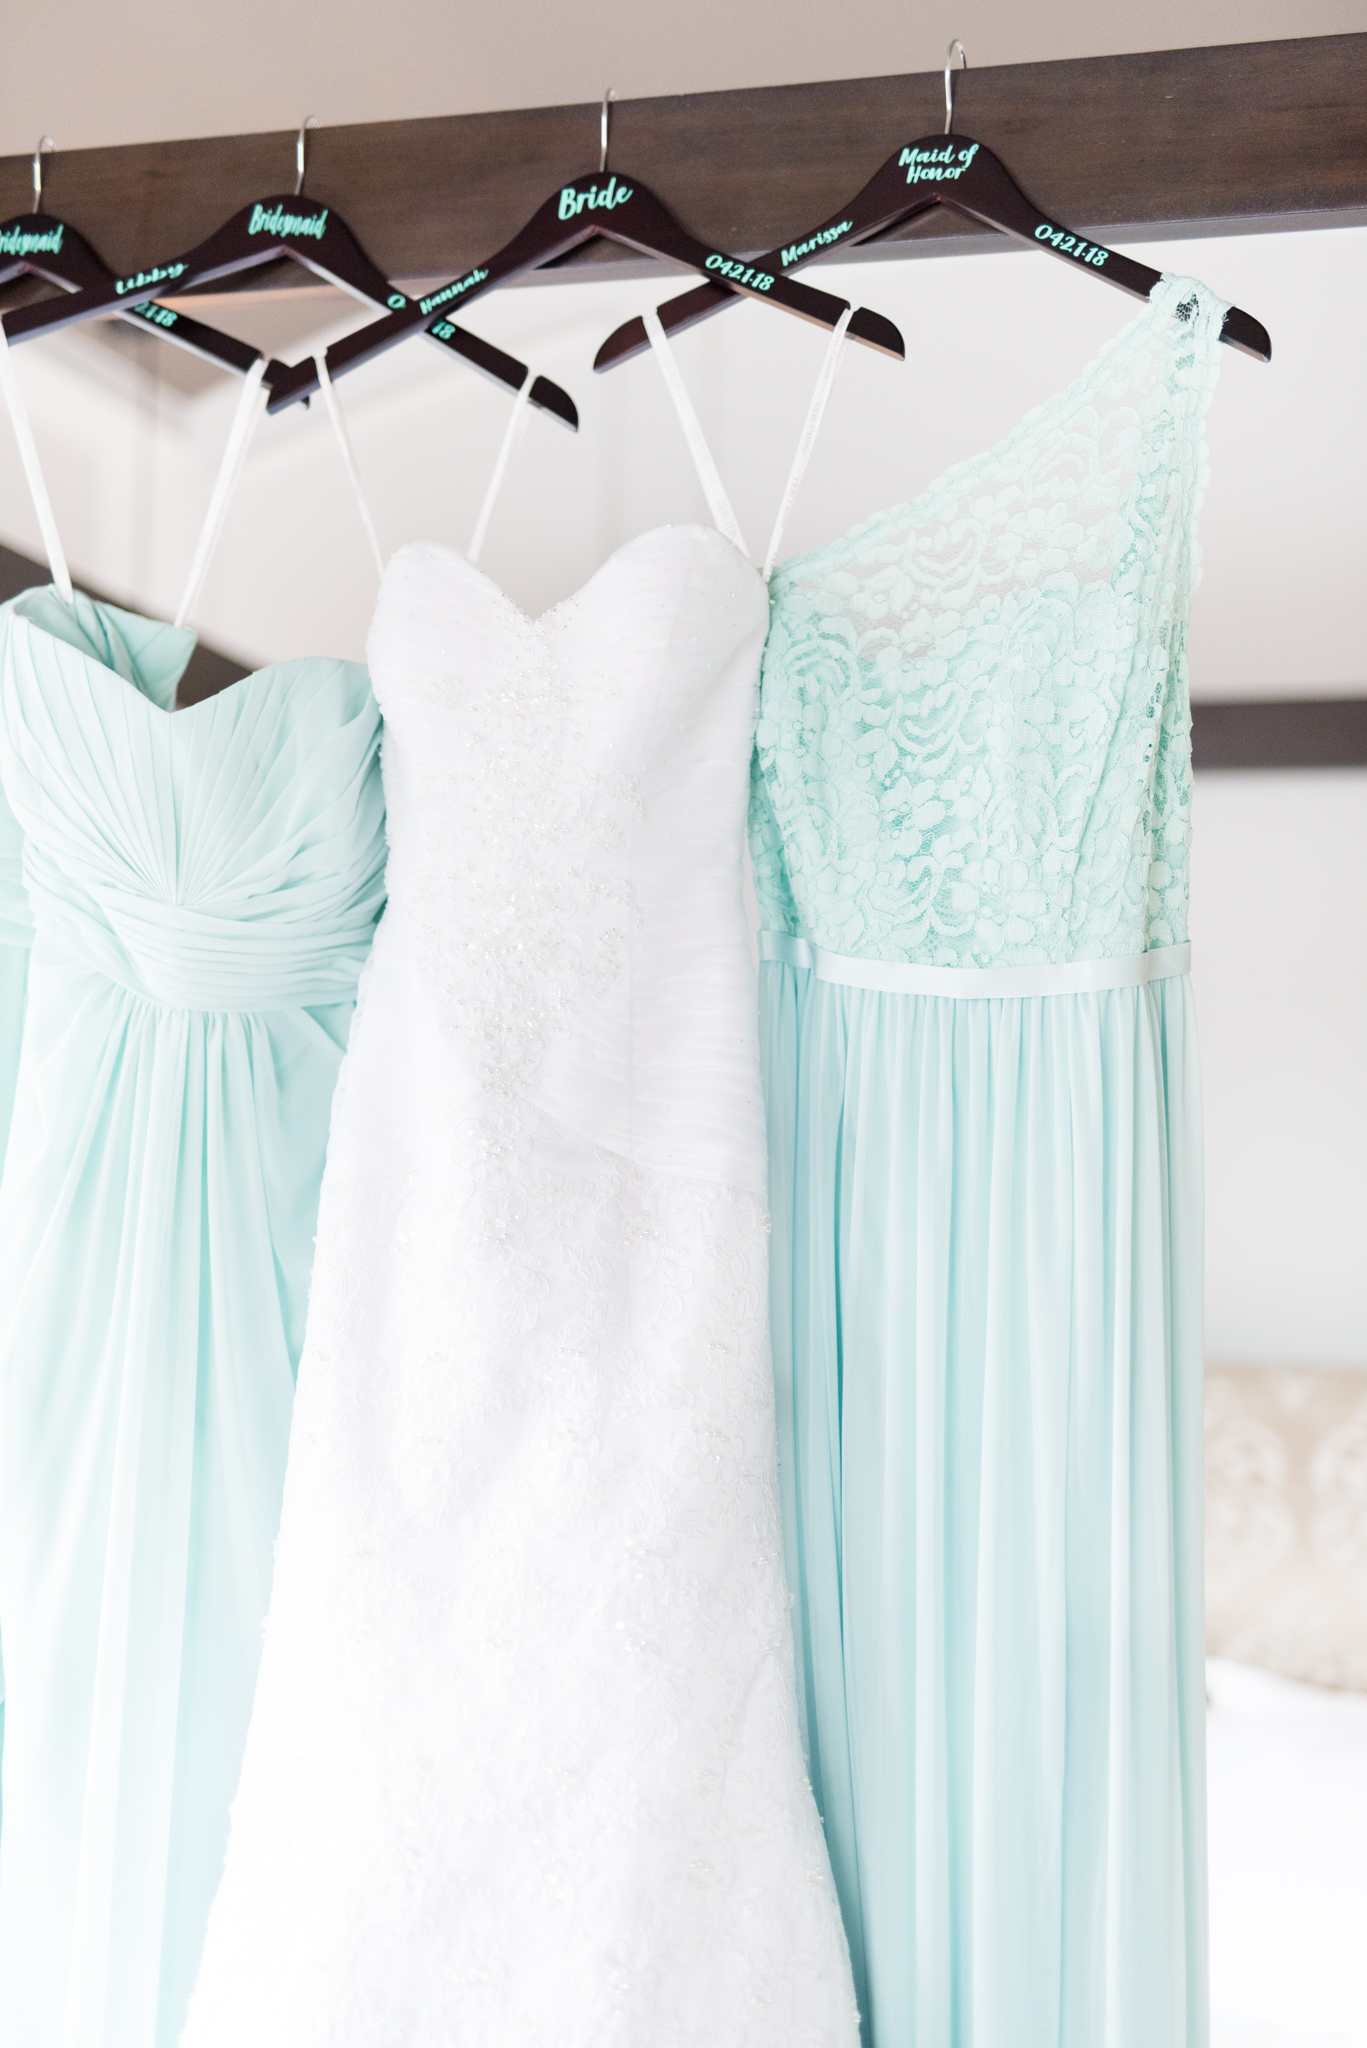 Bride and bridesmaid dresses hand on bed.